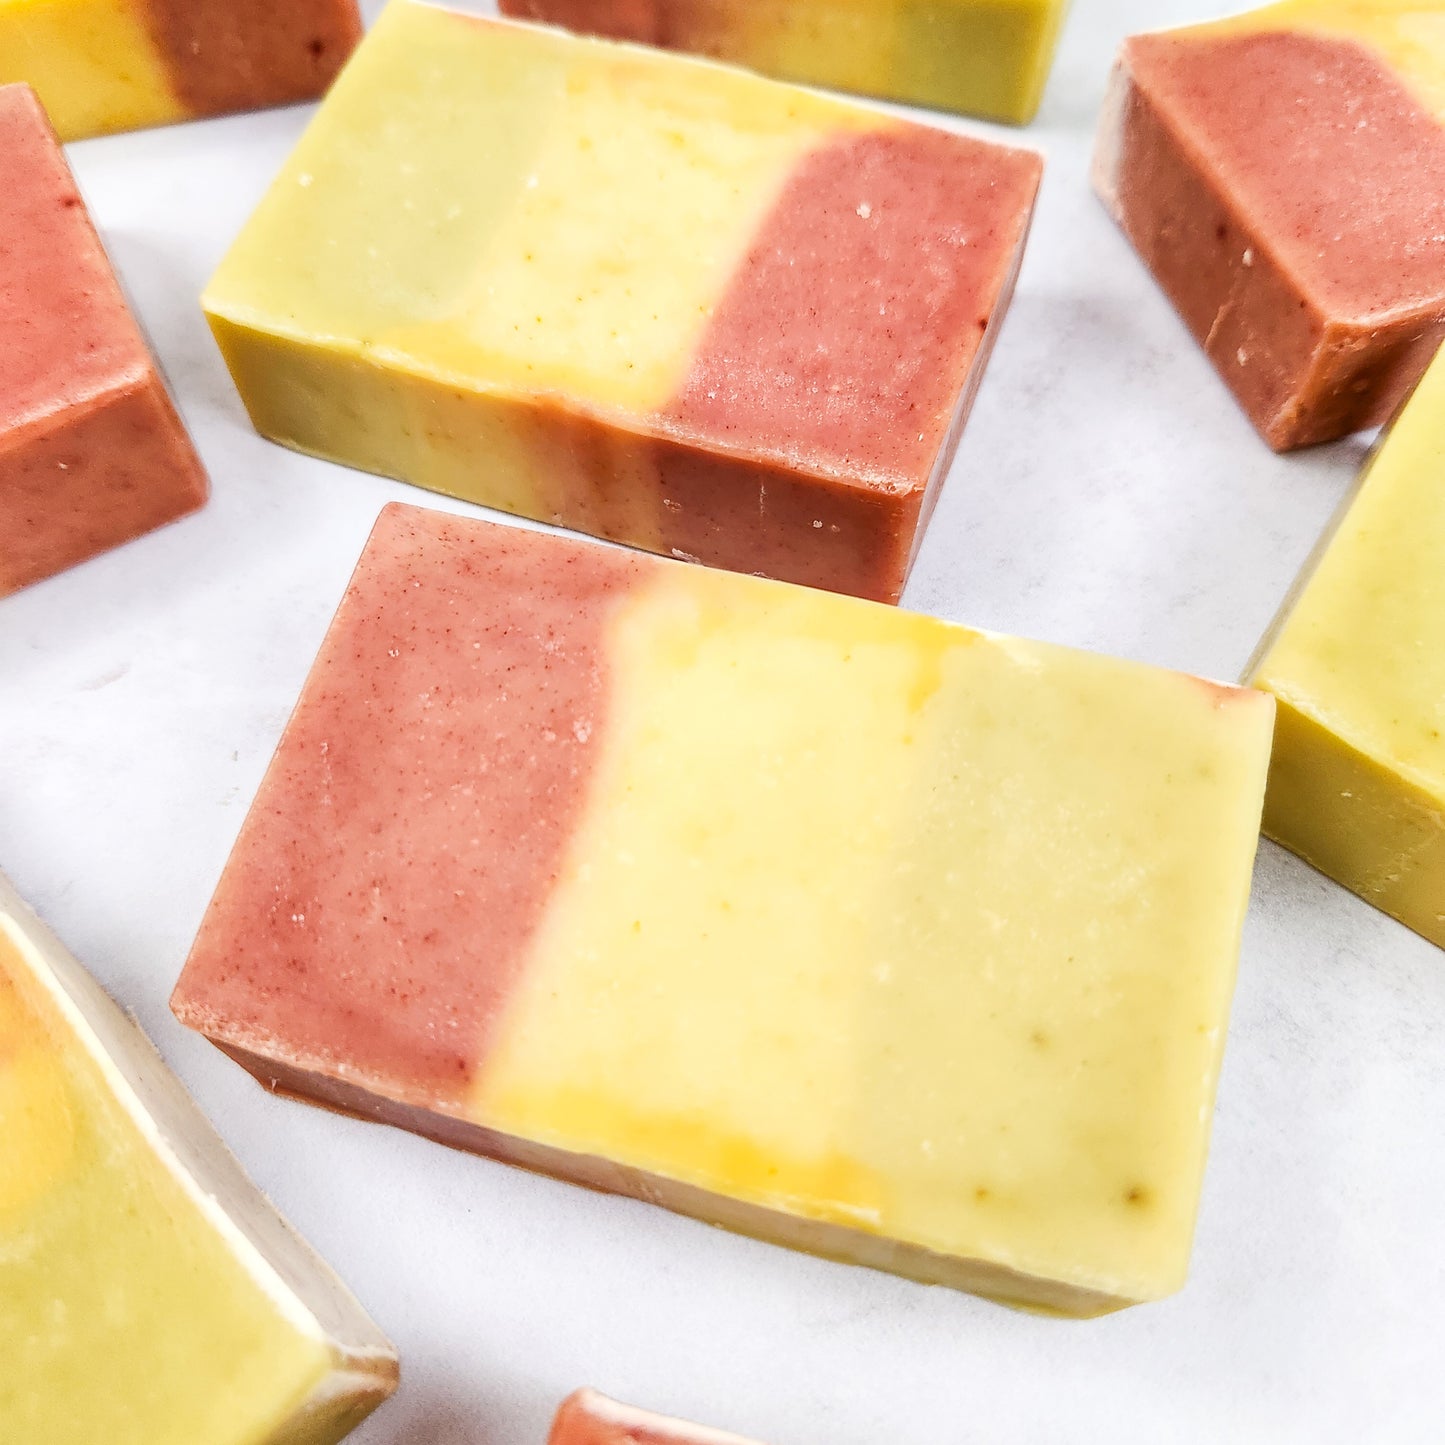 Close up of bars of soap in a striped design of pink, yellow and green, laying on a white background.